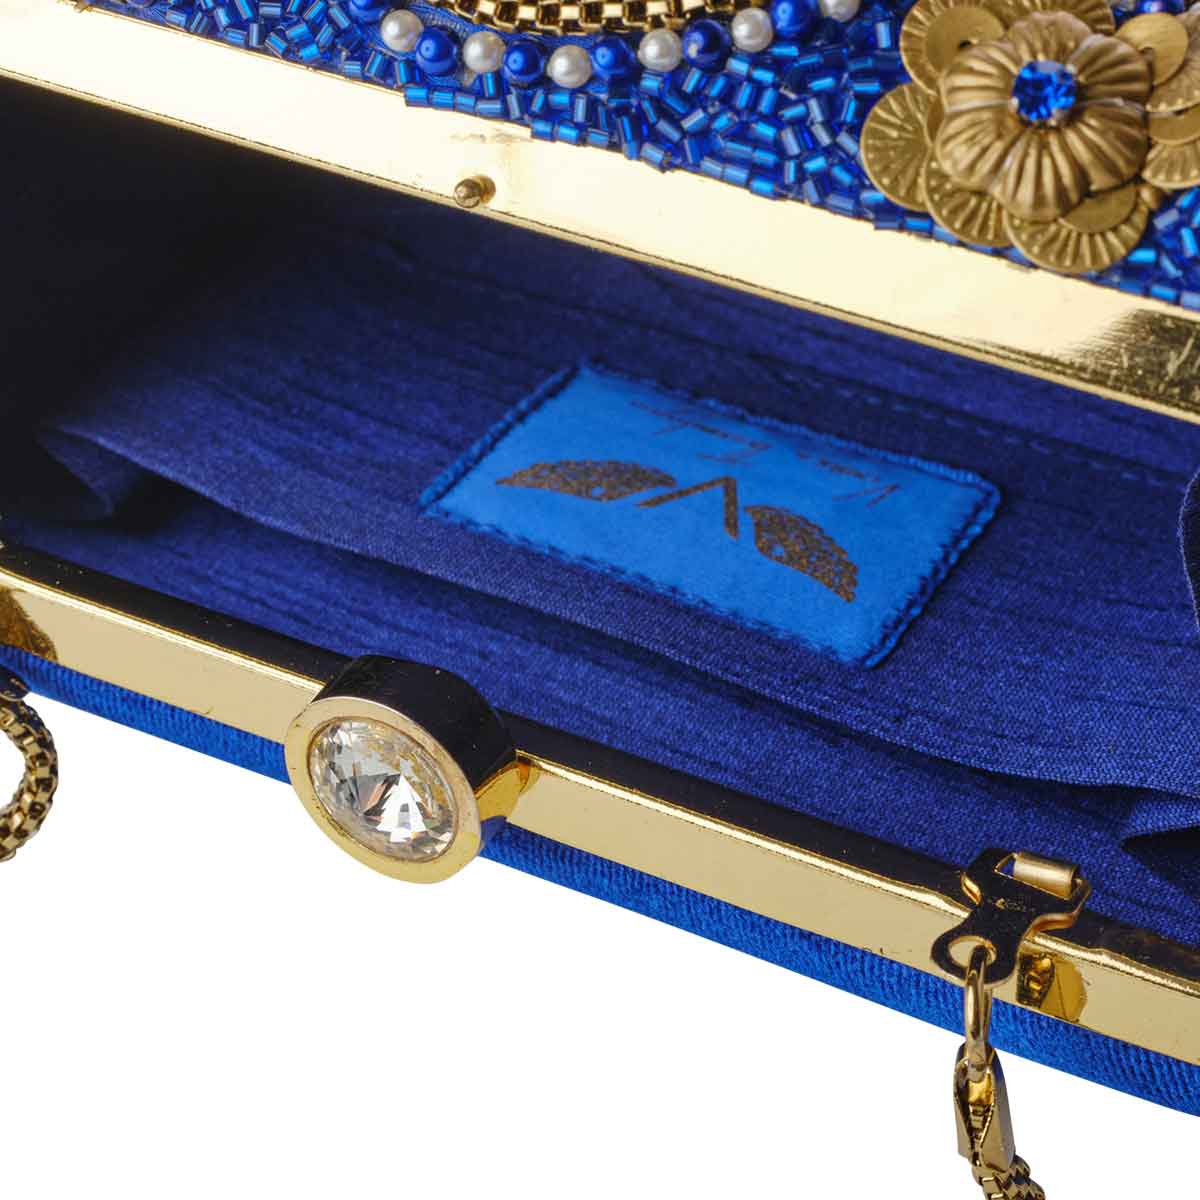 Inside view of blue and gold clutch, has a small pocket to put credit card etc inside. Big stone lock and chain visible. Aelia Clutch from Rani Collection by Veronica Tharmalingam